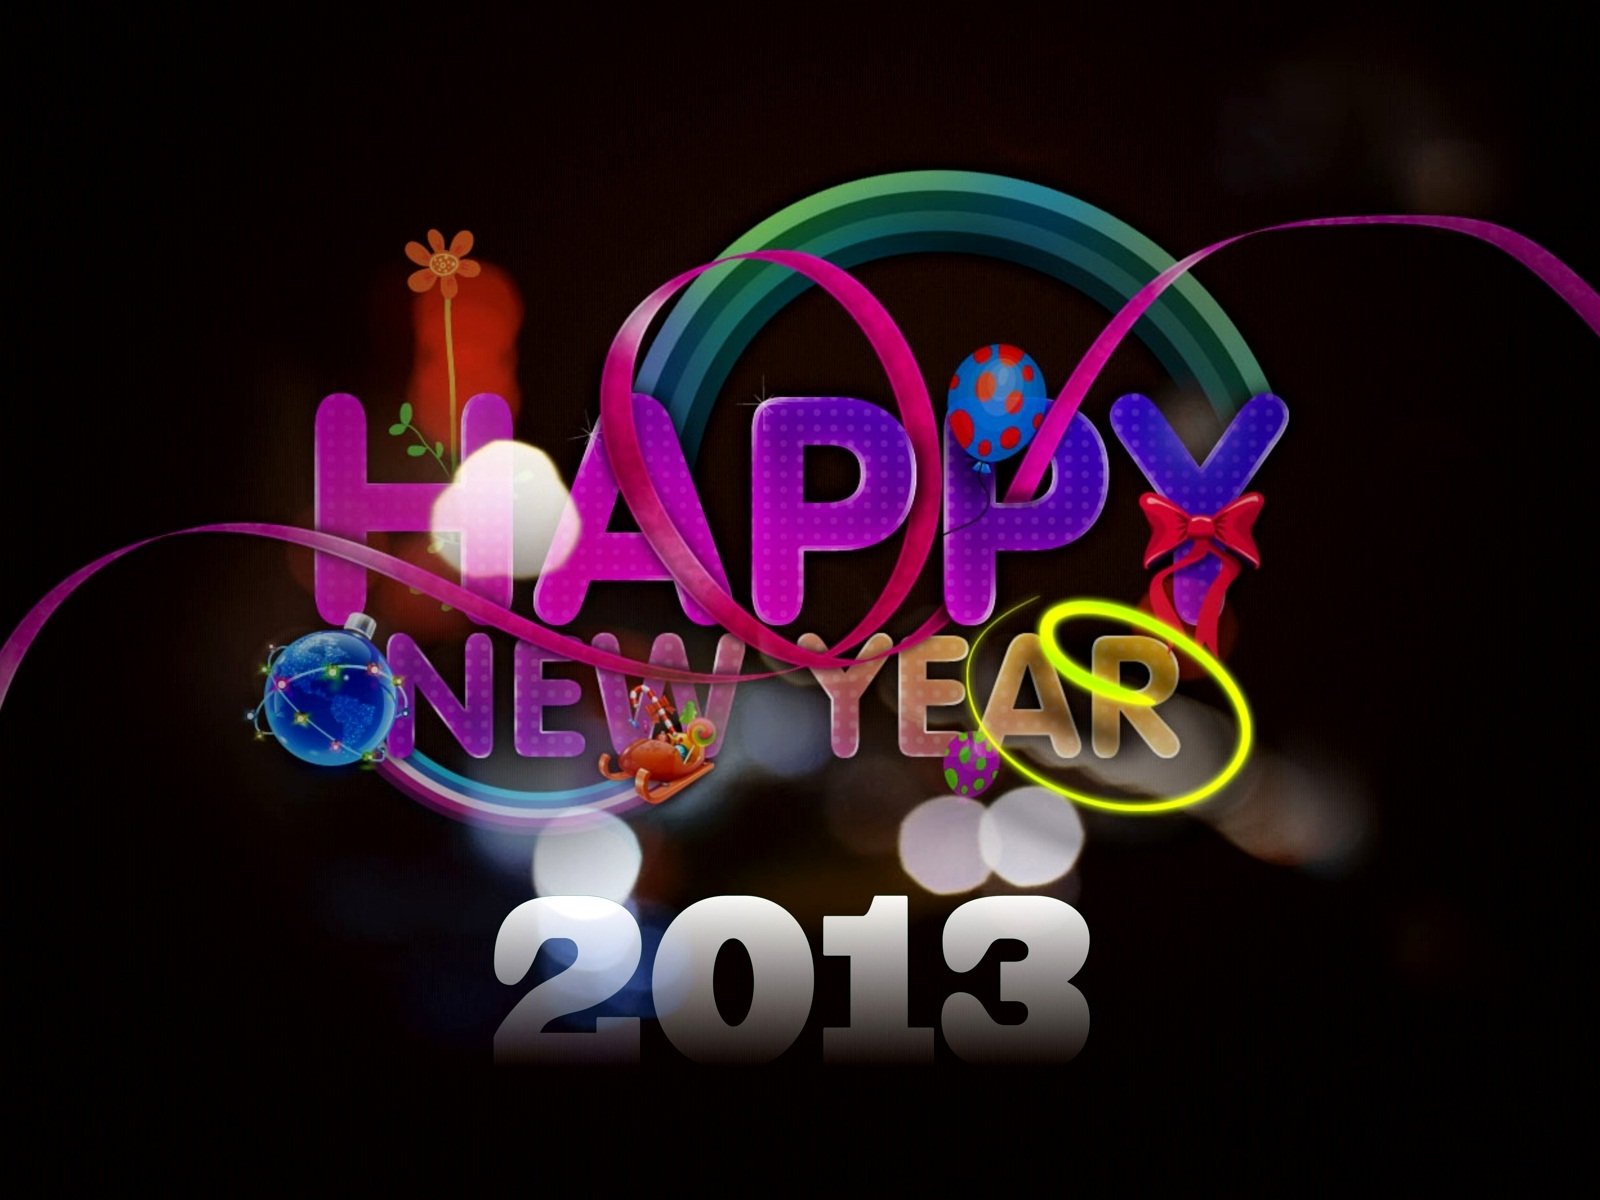 and Happy New Year 2013 Wallpapers HD Wallpapers Backgrounds